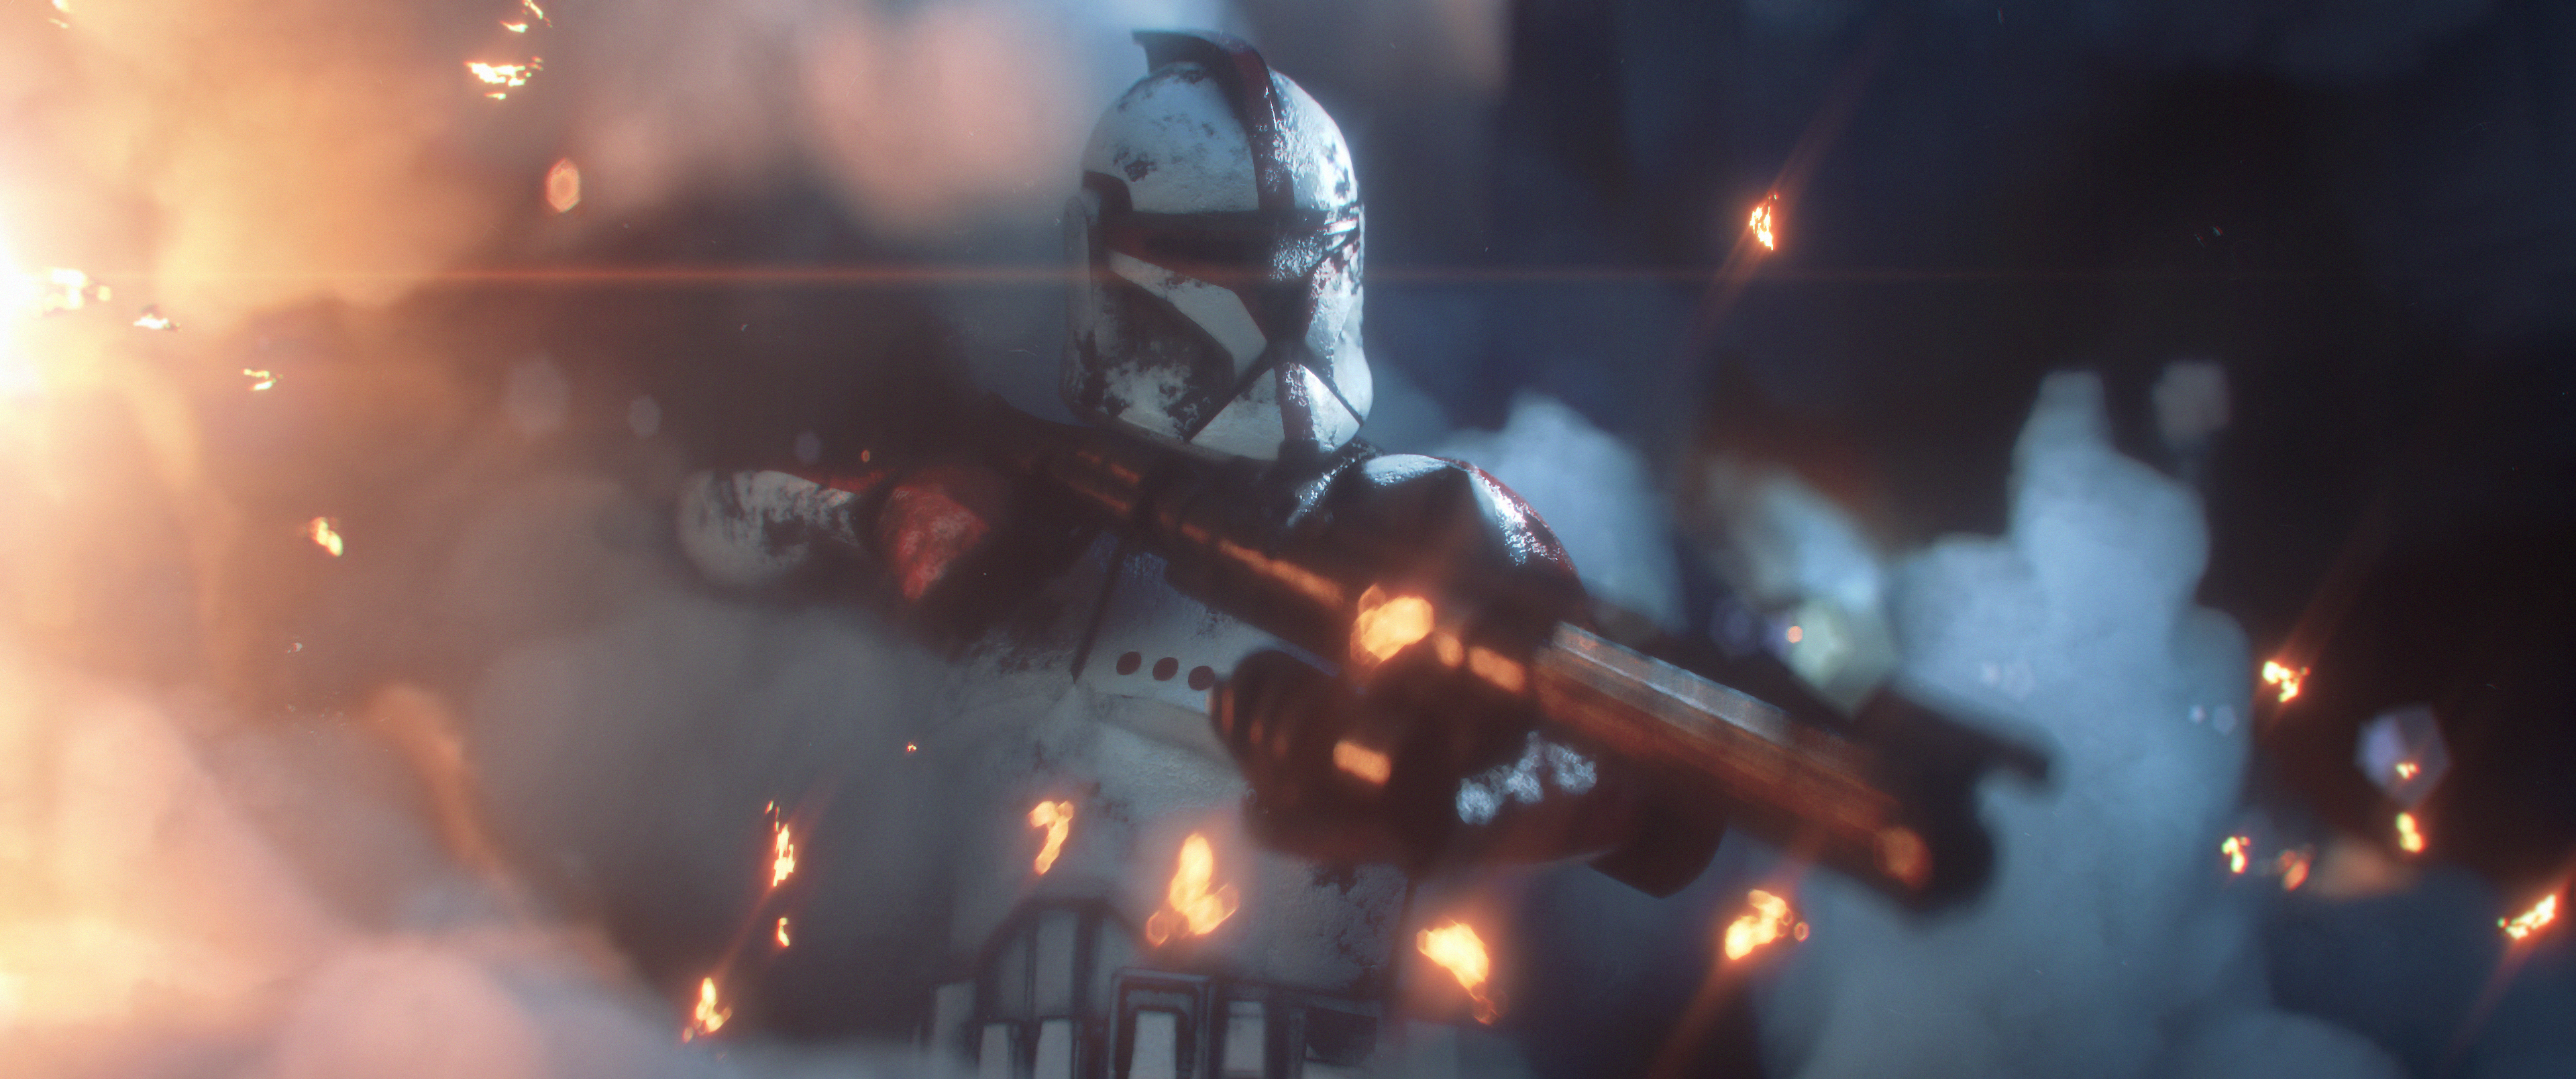 3840x1608 40+ Clone Trooper HD Wallpapers and Backgrounds